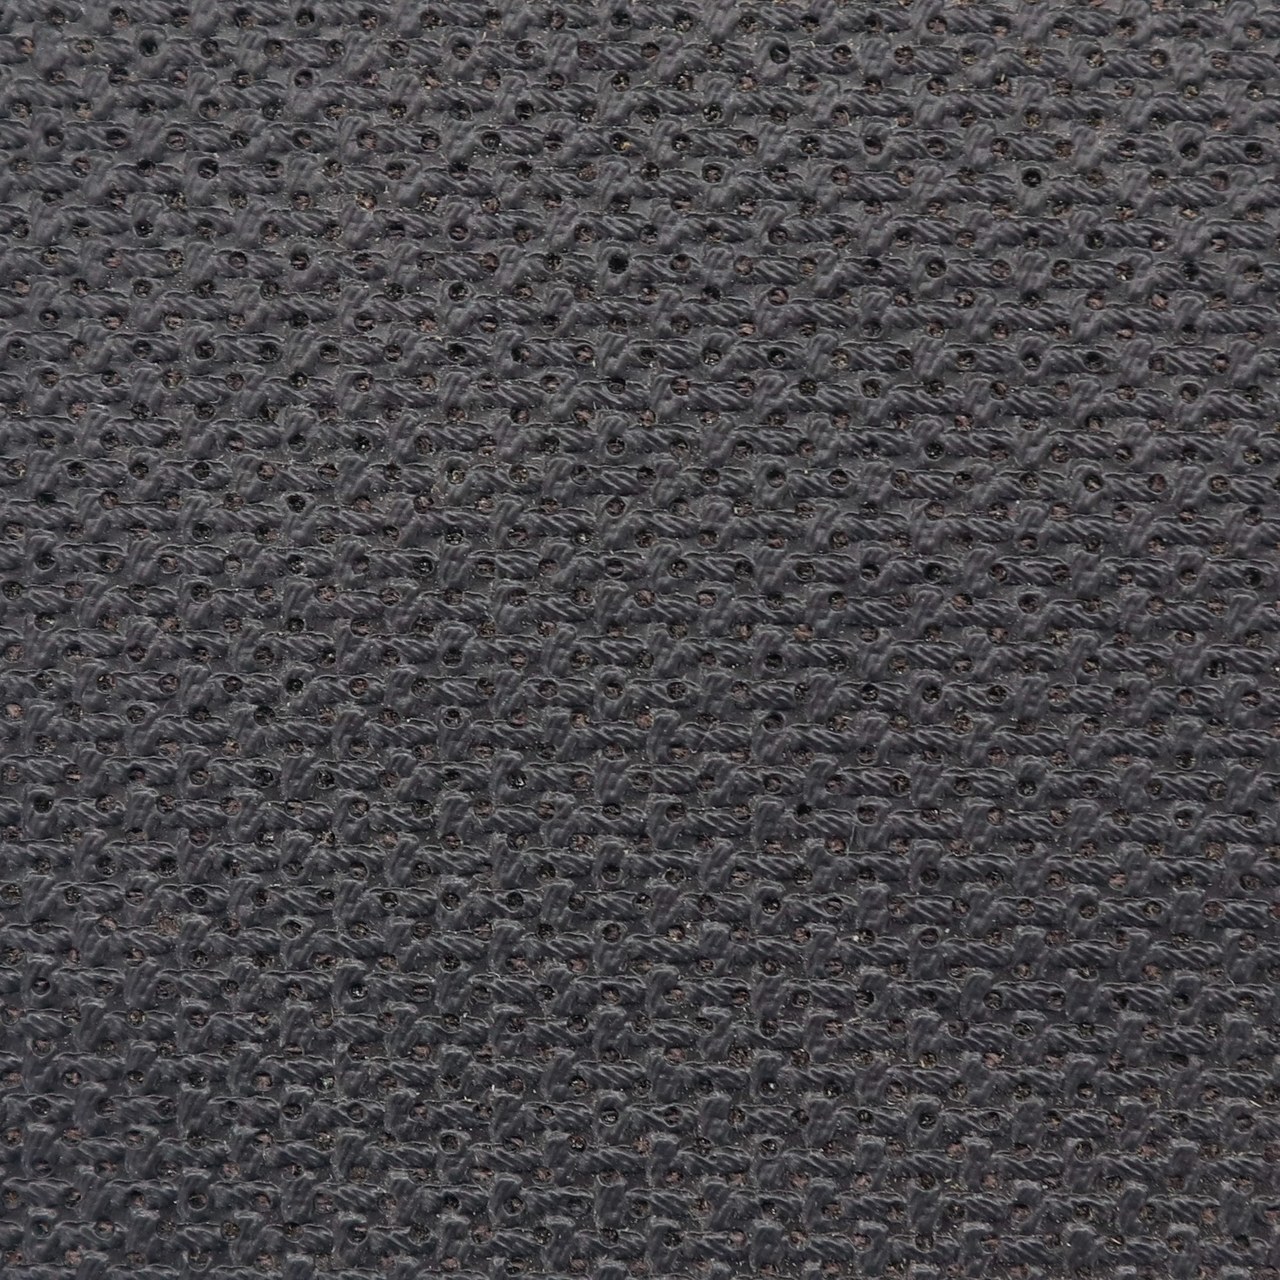 What is the RSBASKETBL (black basketweave) material thickness?